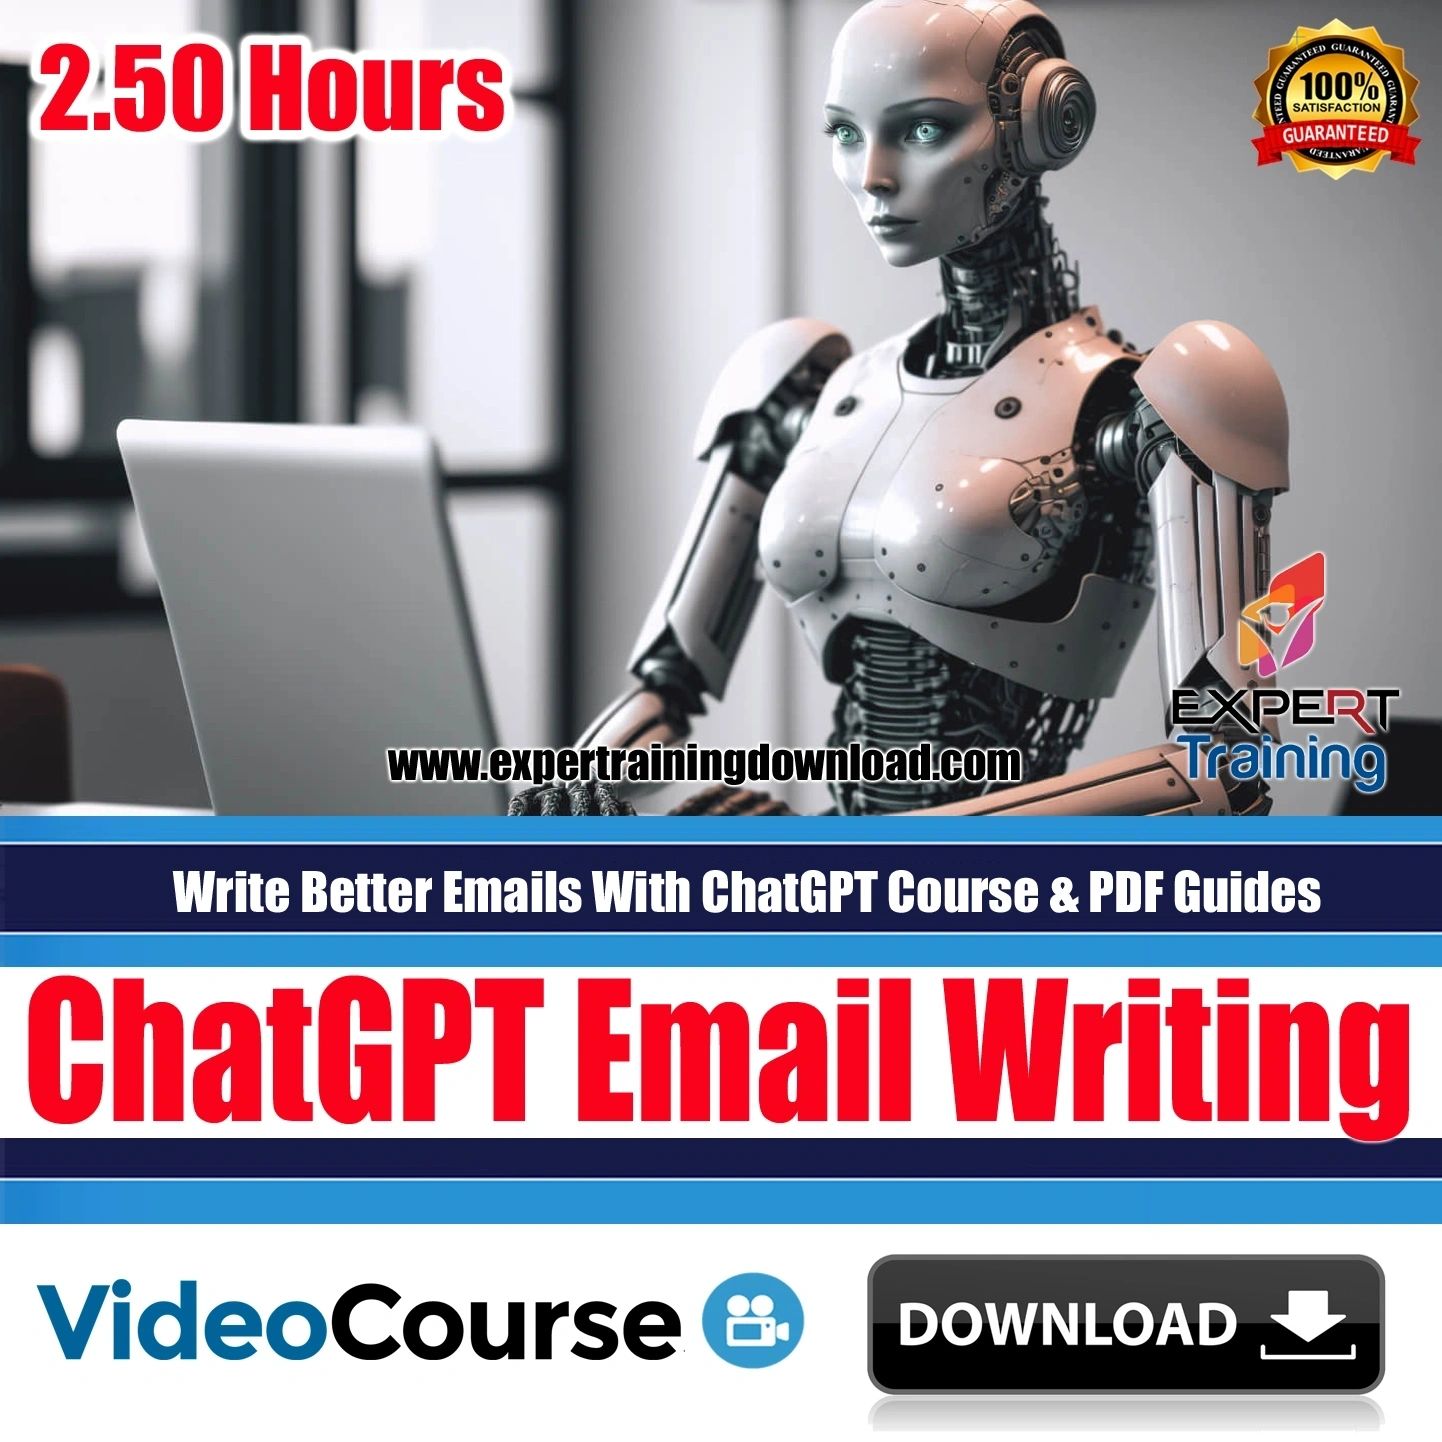 Write Better Emails With ChatGPT Course & PDF Guides